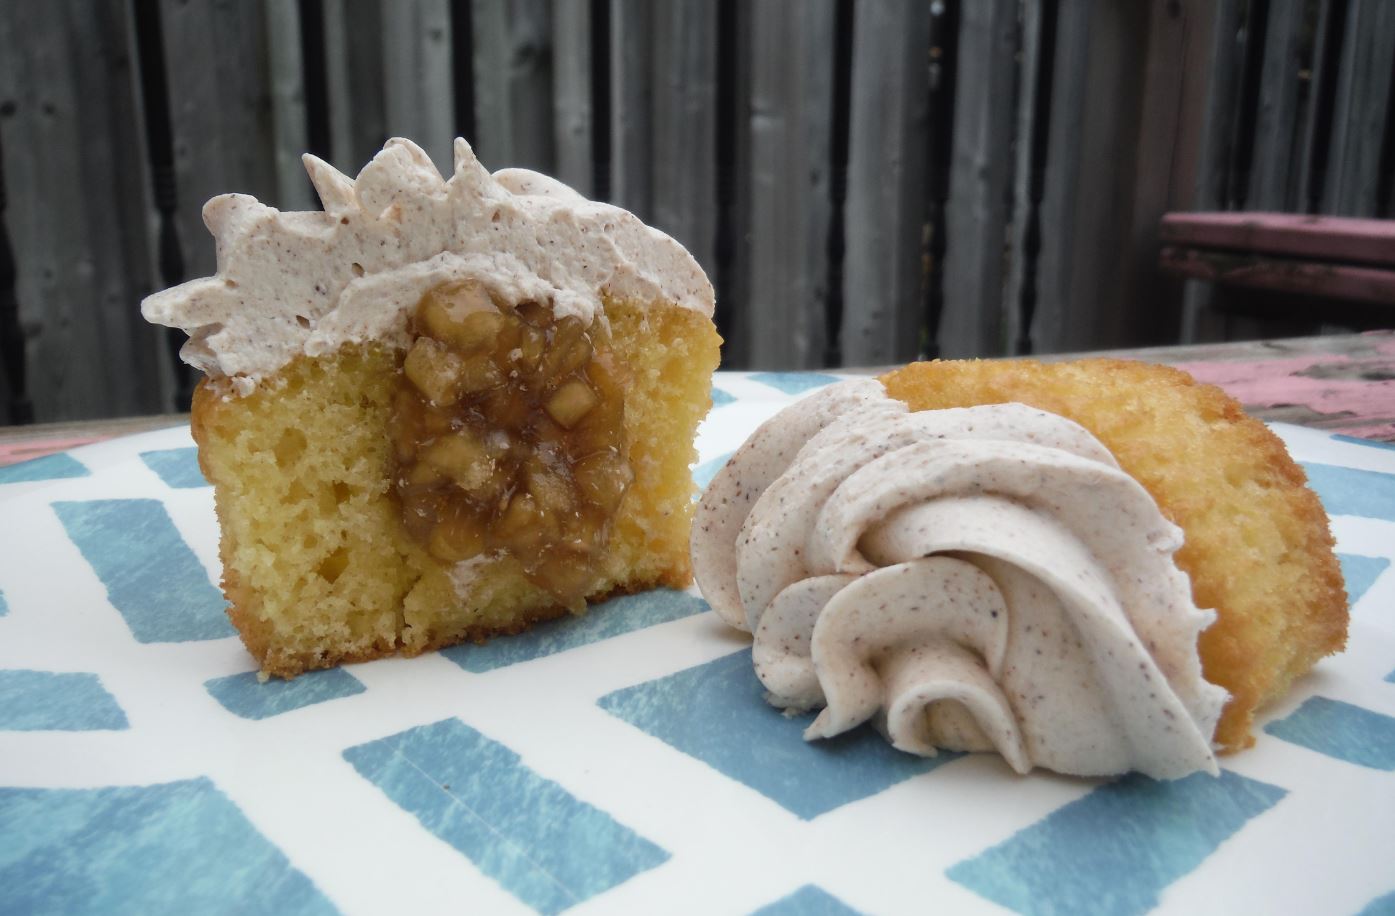 Image of a freshly baked Apple Pie Cupcake with a golden brown cupcake base, a spiced apple filling, and a white swirl of cinnamon buttercream frosting.